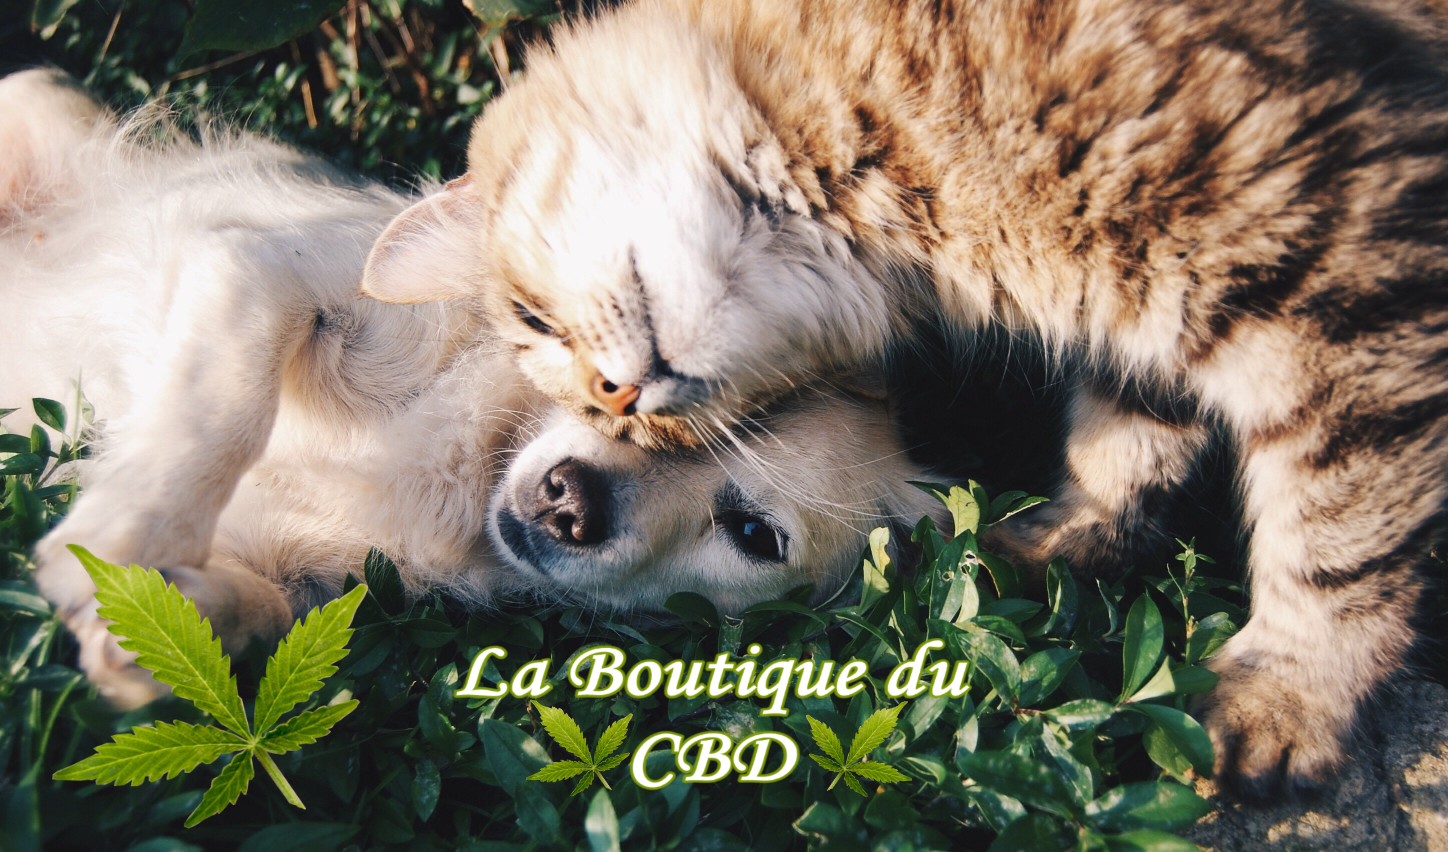 HUILE CBD POUR ANIMAUX BAILLY 78